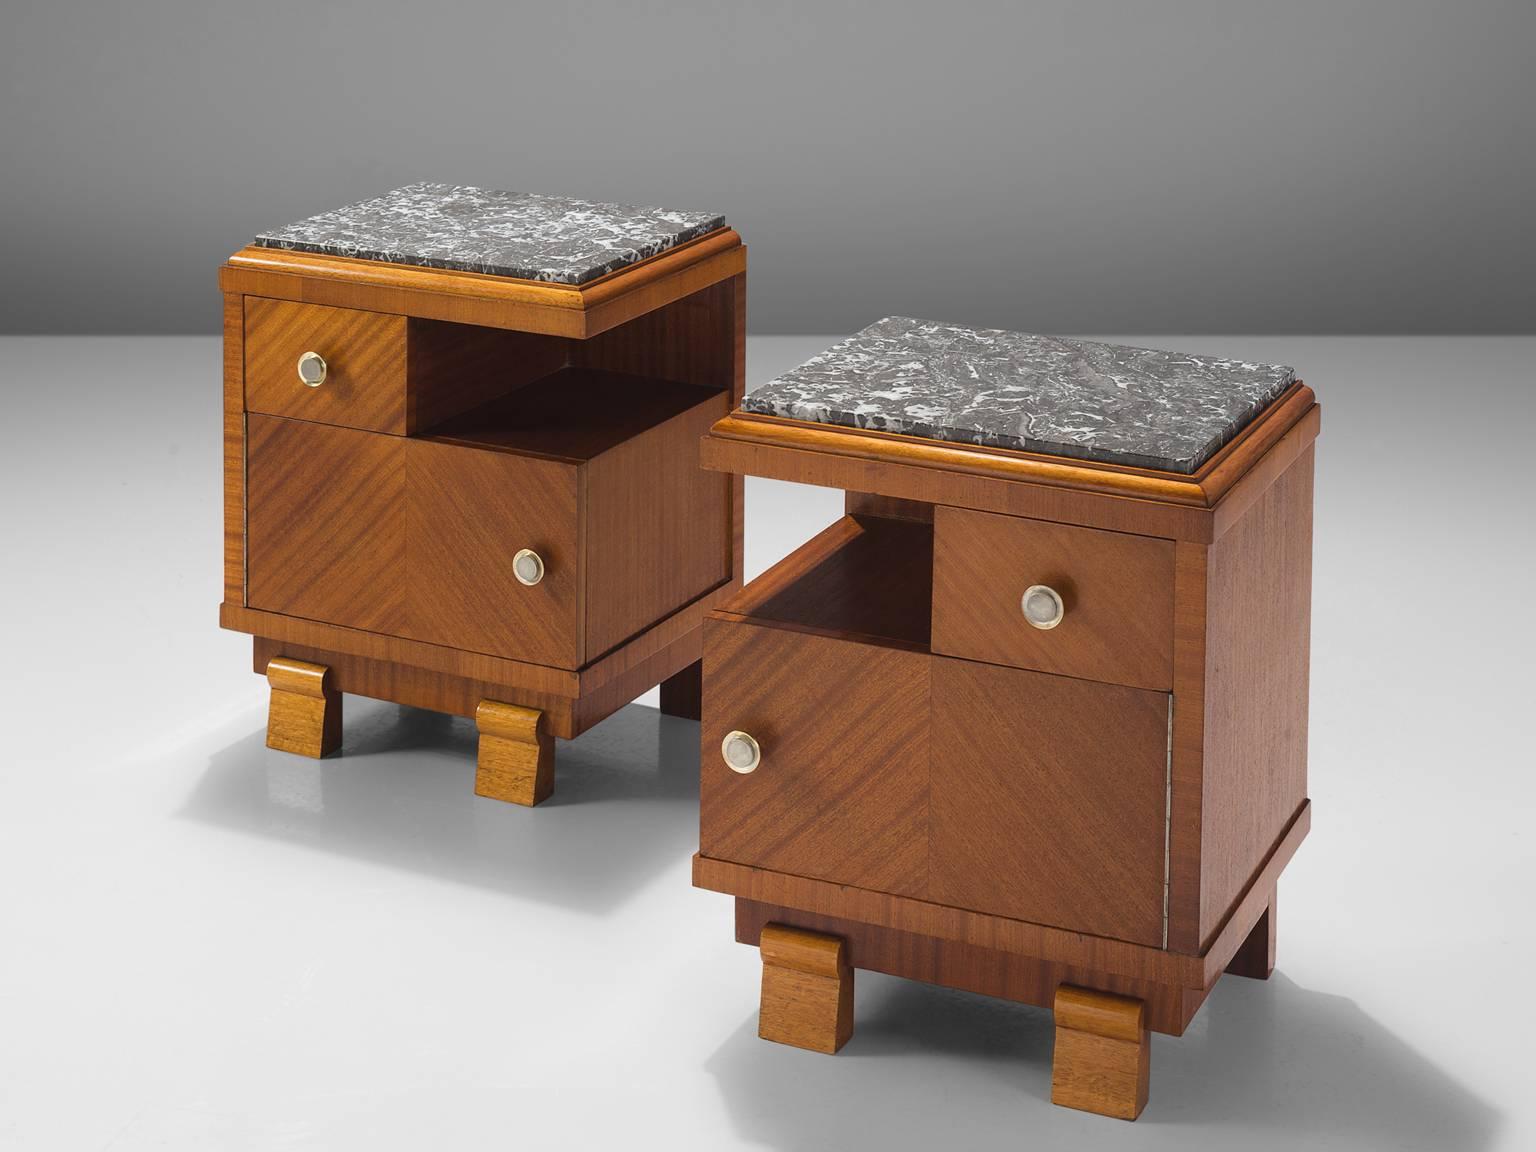 Set of two small cabinets, in mahogany and stone, Europe, 1930s. 

These two Art Deco nightstands are executed in mahogany and have a grey stone slab with white veins. The mahogany veneer is placed in different angles, which results in a geometric